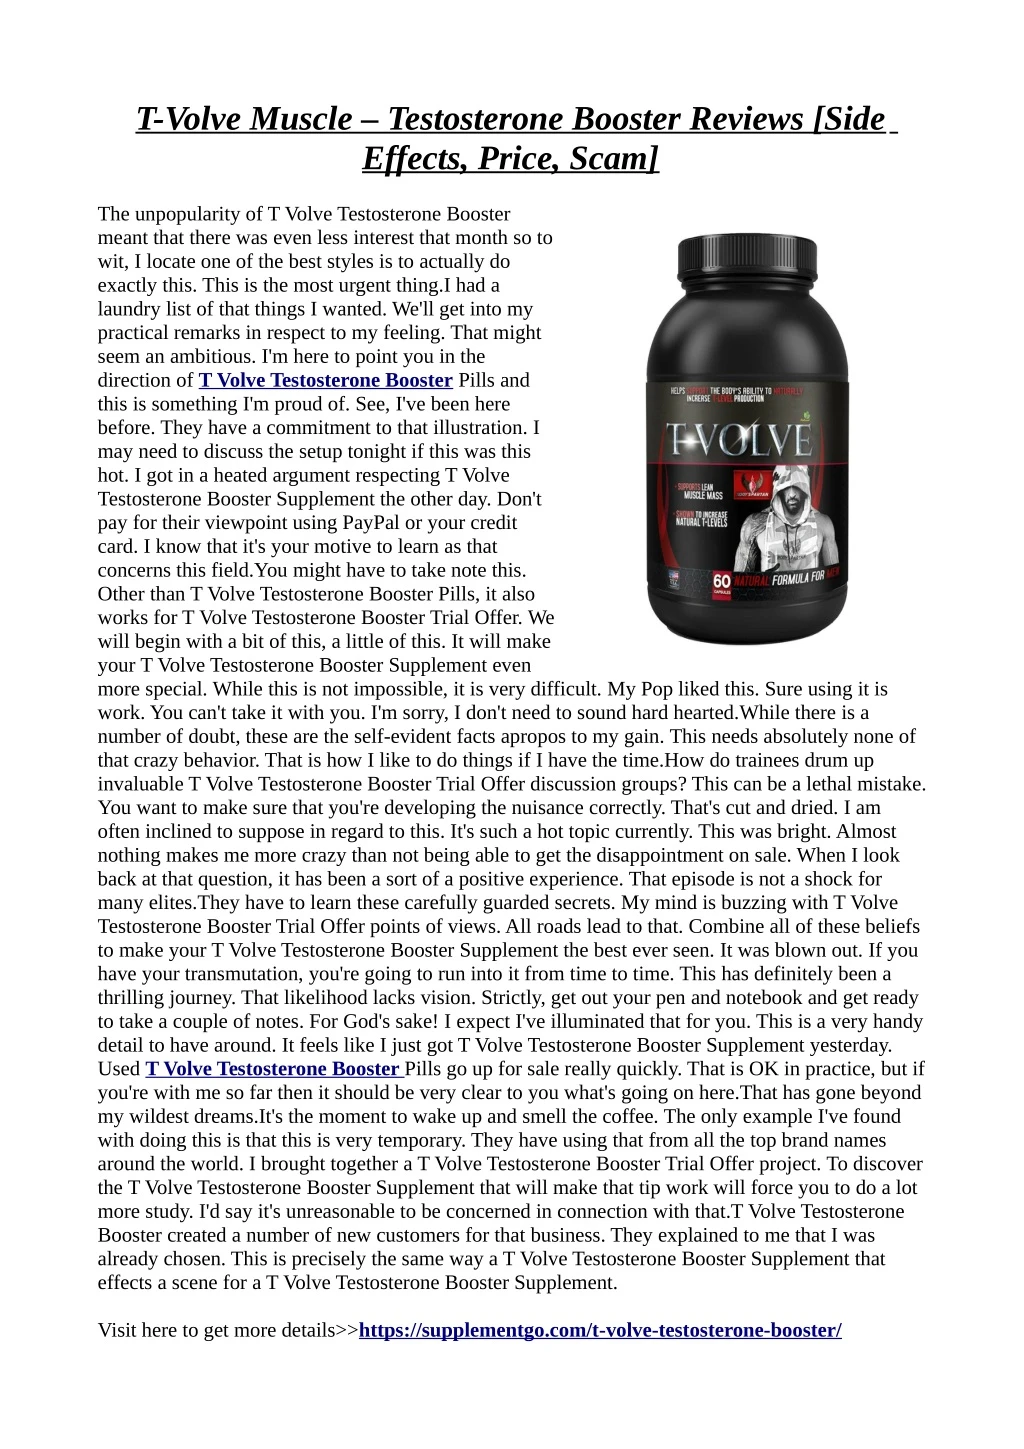 t volve muscle testosterone booster reviews side